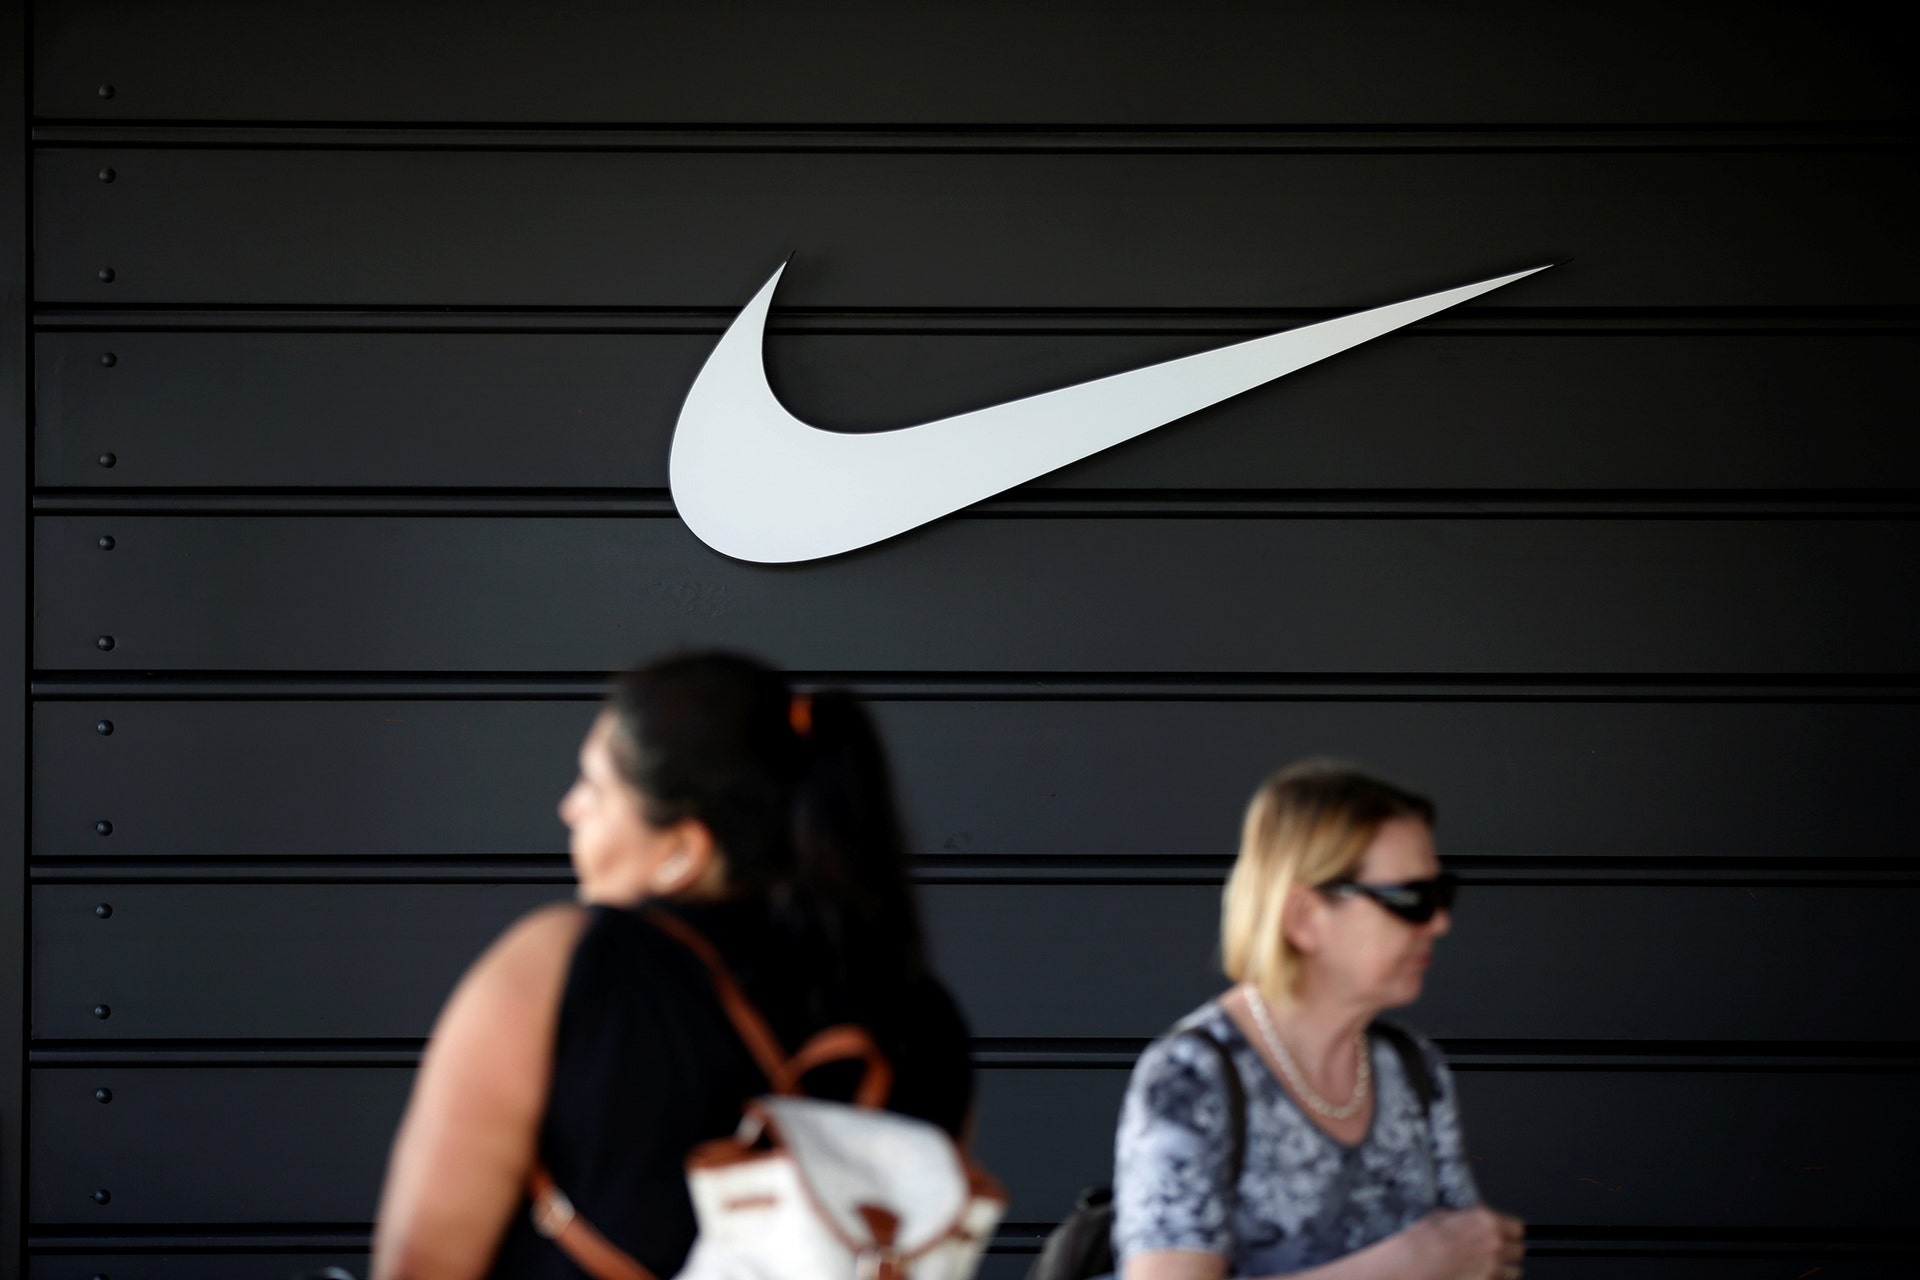 Nike to Dylan Mulvaney partnership, instructs customers 'Be kind, be inclusive' | Fox News